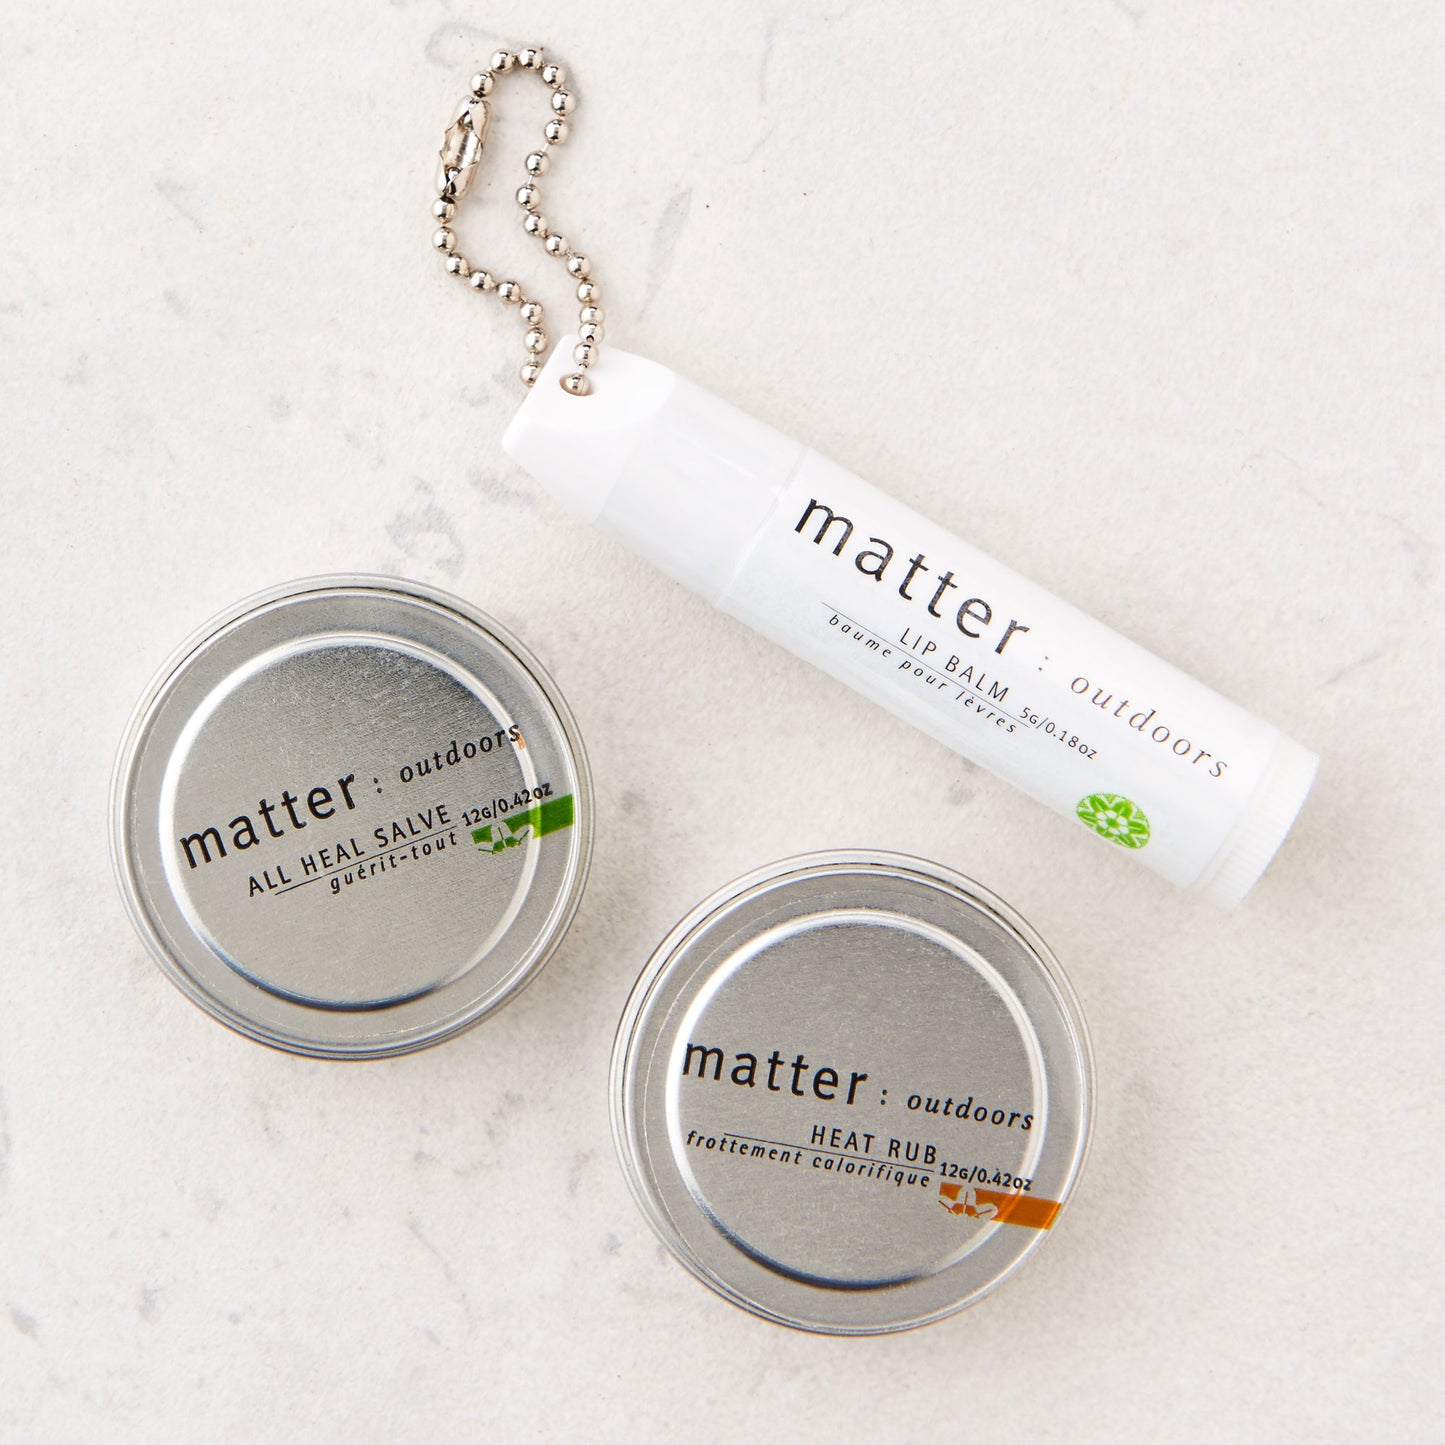 Made in Canada natural day pack with all heal salve, heat rub and lip balm by Matter Outdoors.